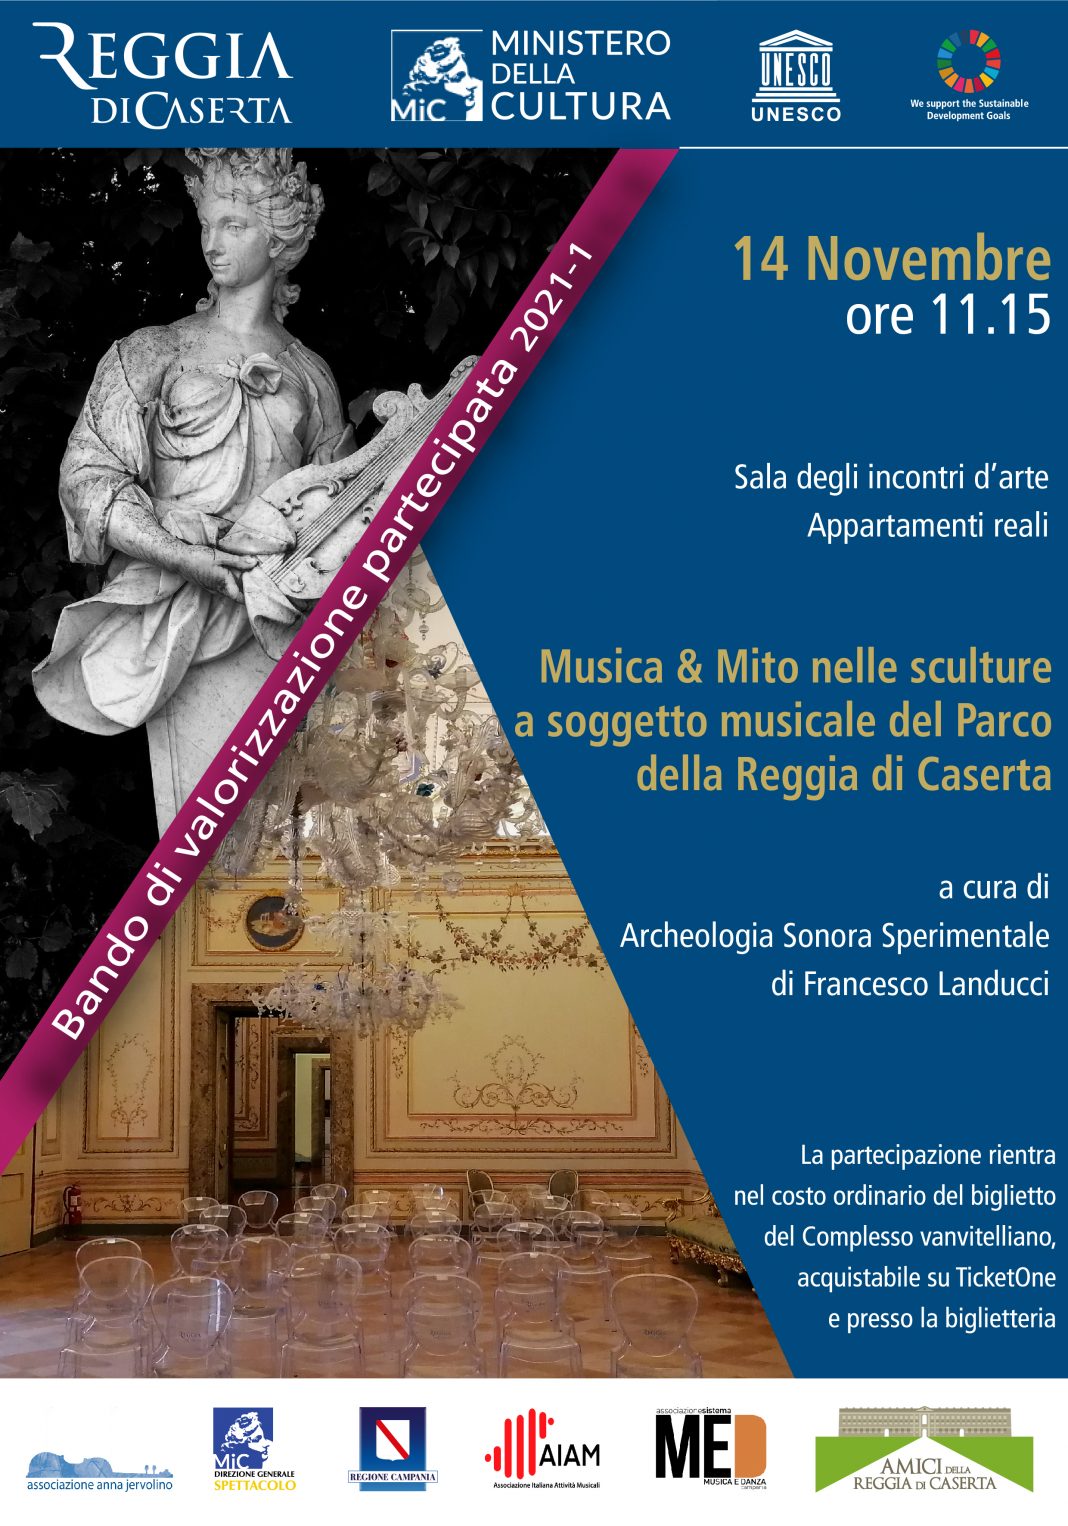 Autunno musicale